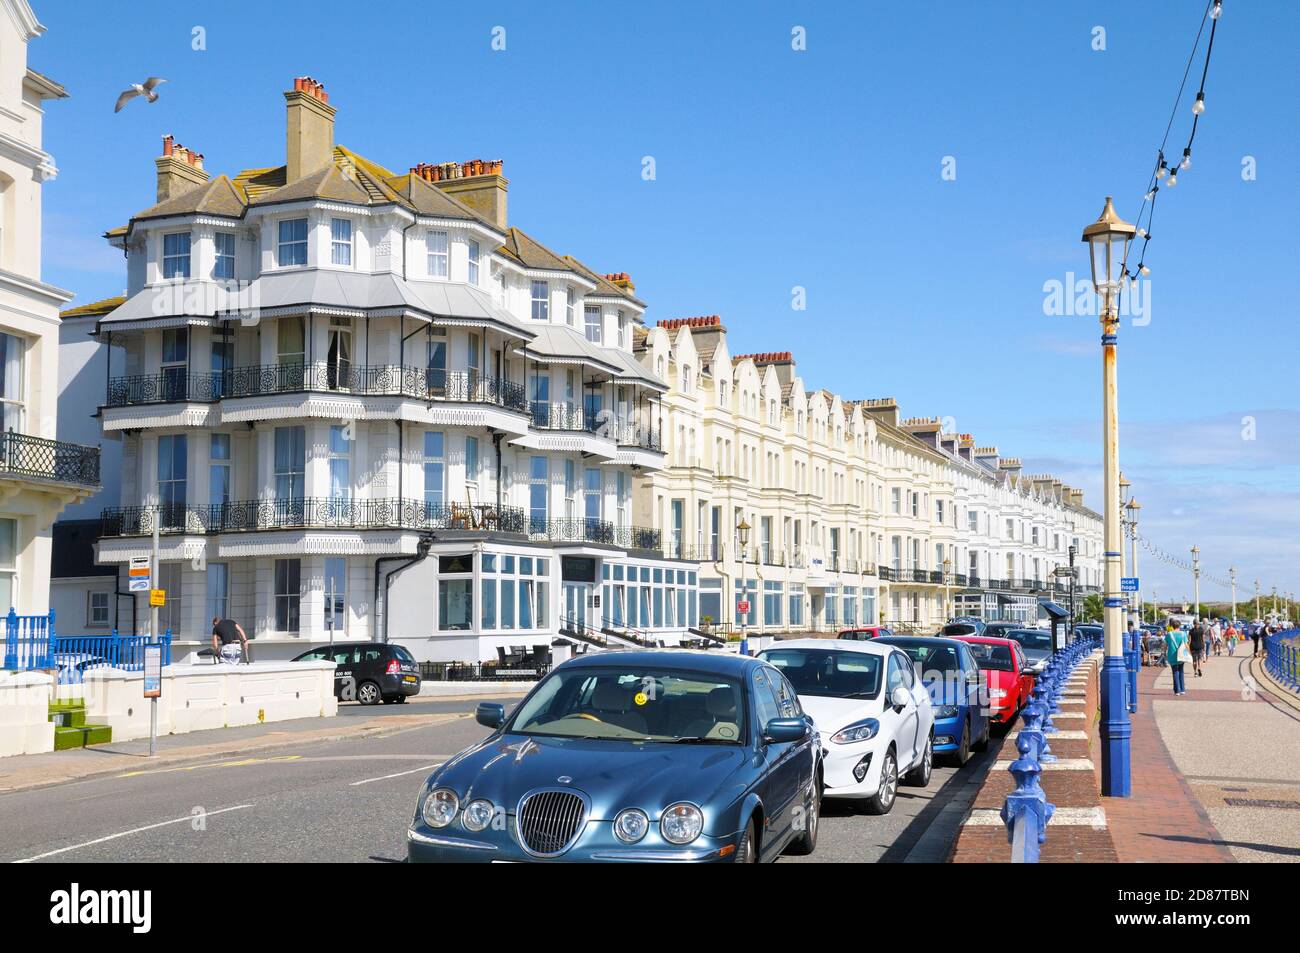 Hotels overlooking the seafront promenade at Eastbourne, East Sussex, England, UK Stock Photo